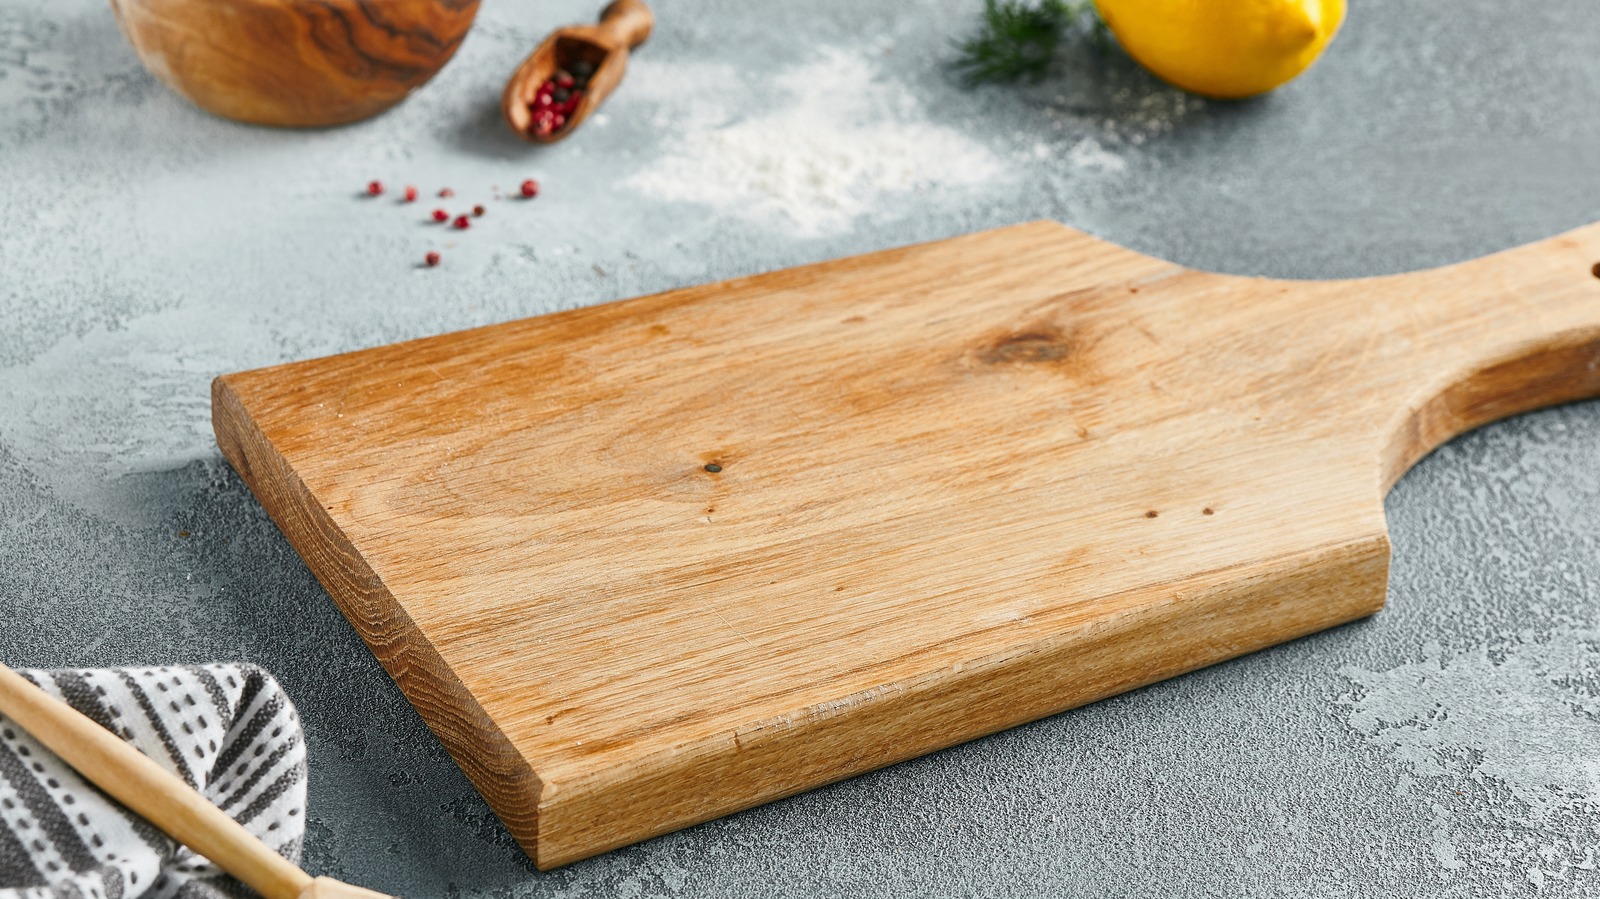 https://www.tastingtable.com/img/gallery/the-easy-way-to-sanitize-your-wooden-cutting-boards/l-intro-1680112989.jpg